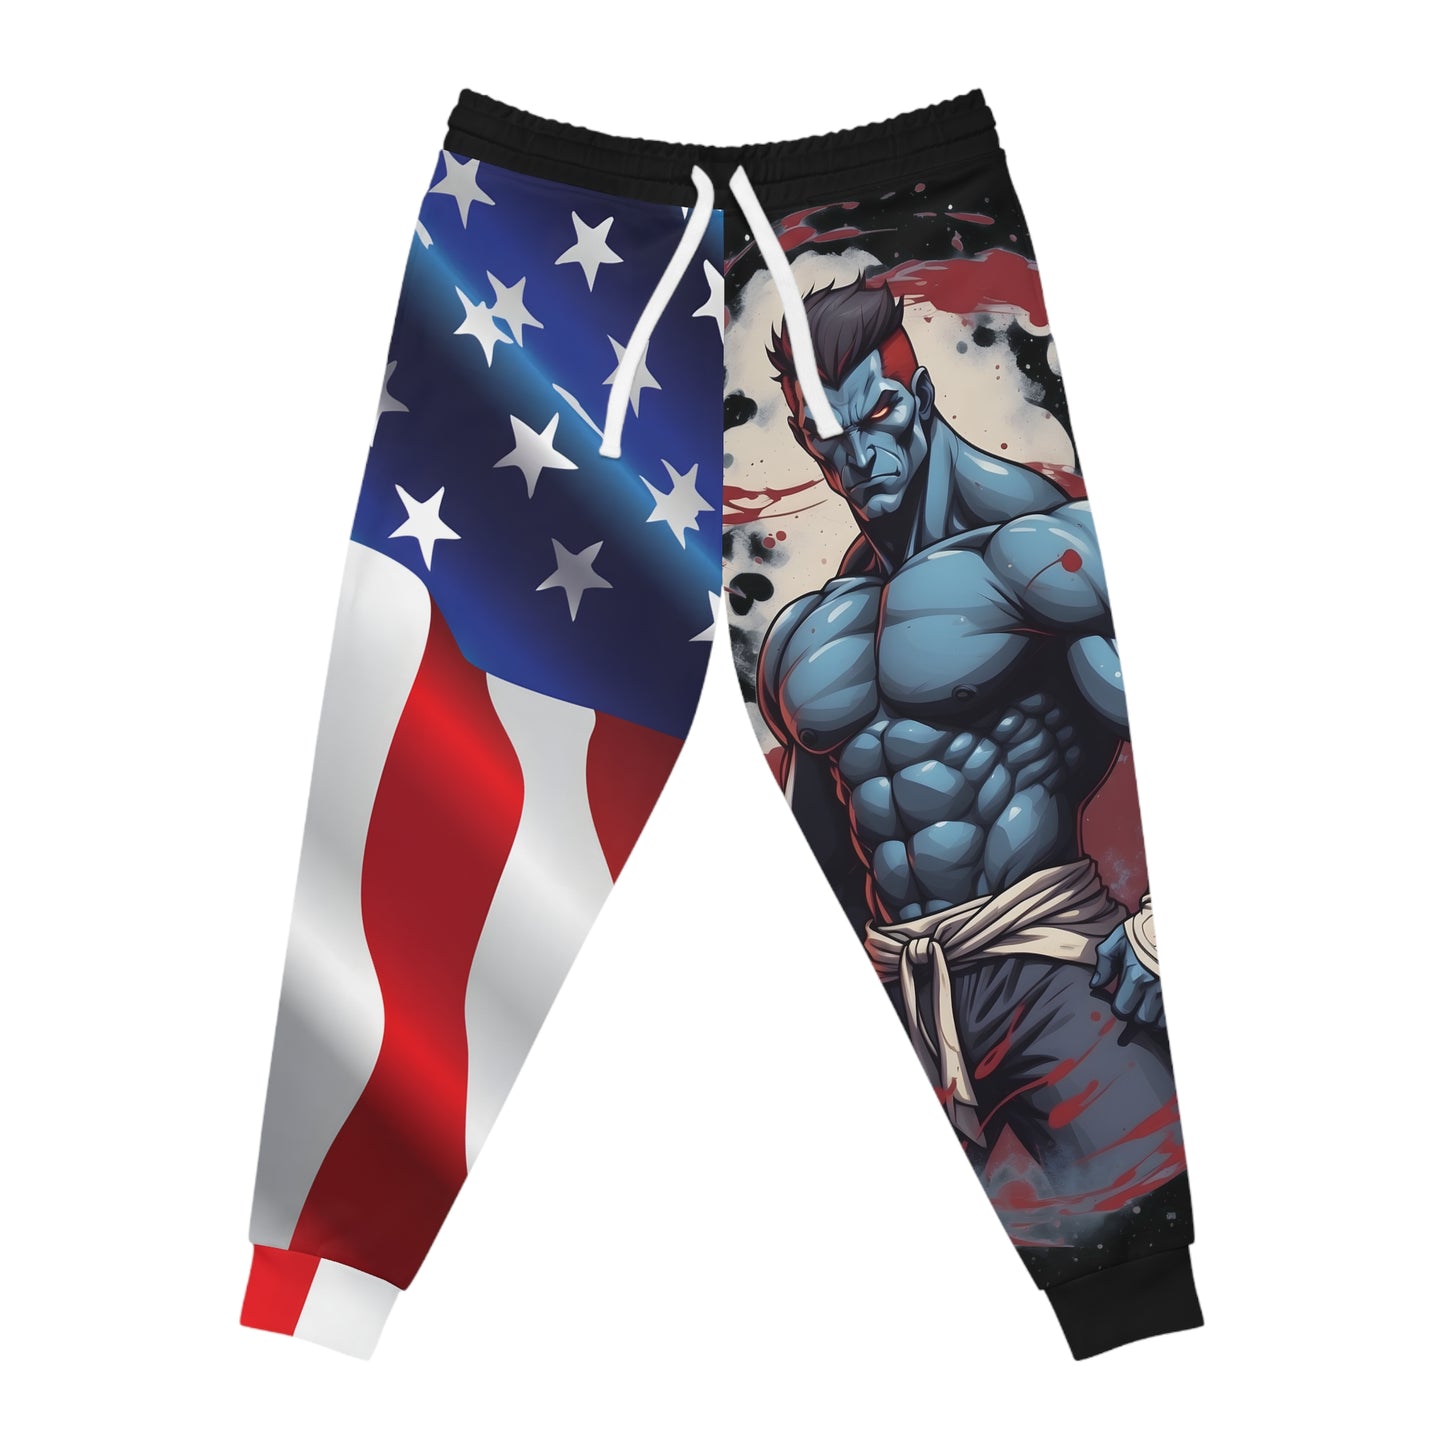 Kǎtōng Piàn - Prized Fighter Collection - America - 010 - Athletic Joggers